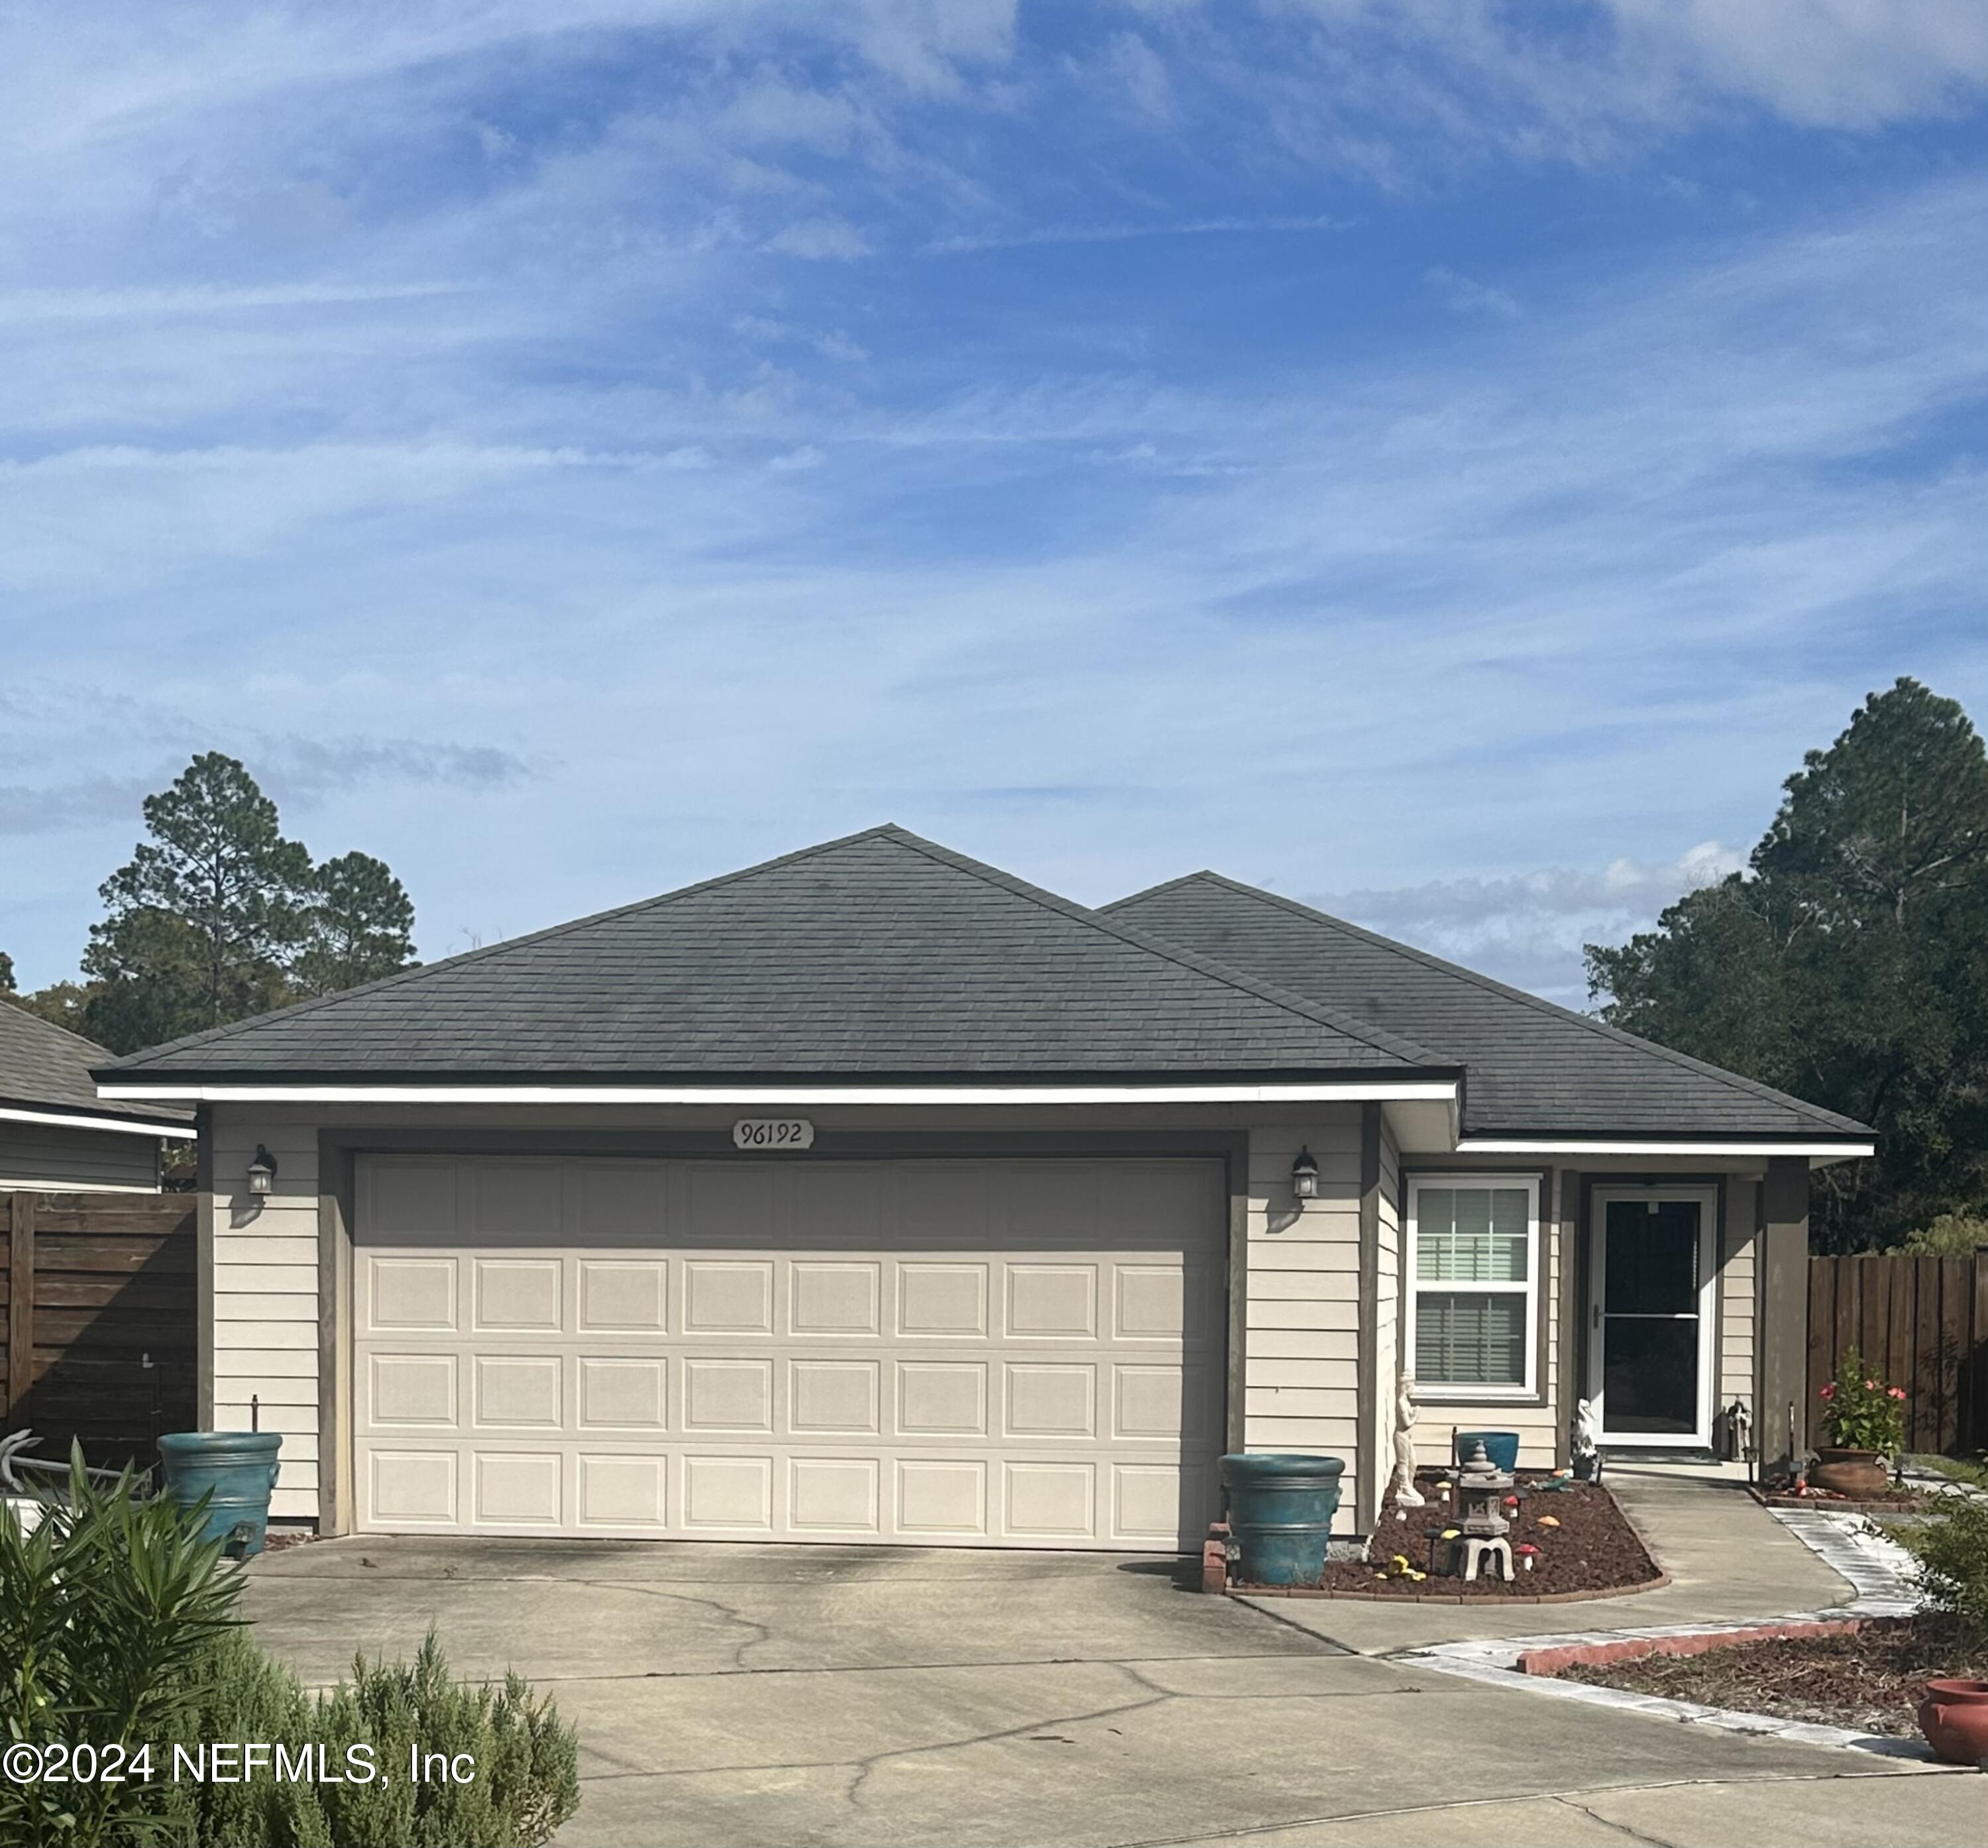 Yulee, FL home for sale located at 96192 Stoney Glen Court, Yulee, FL 32097